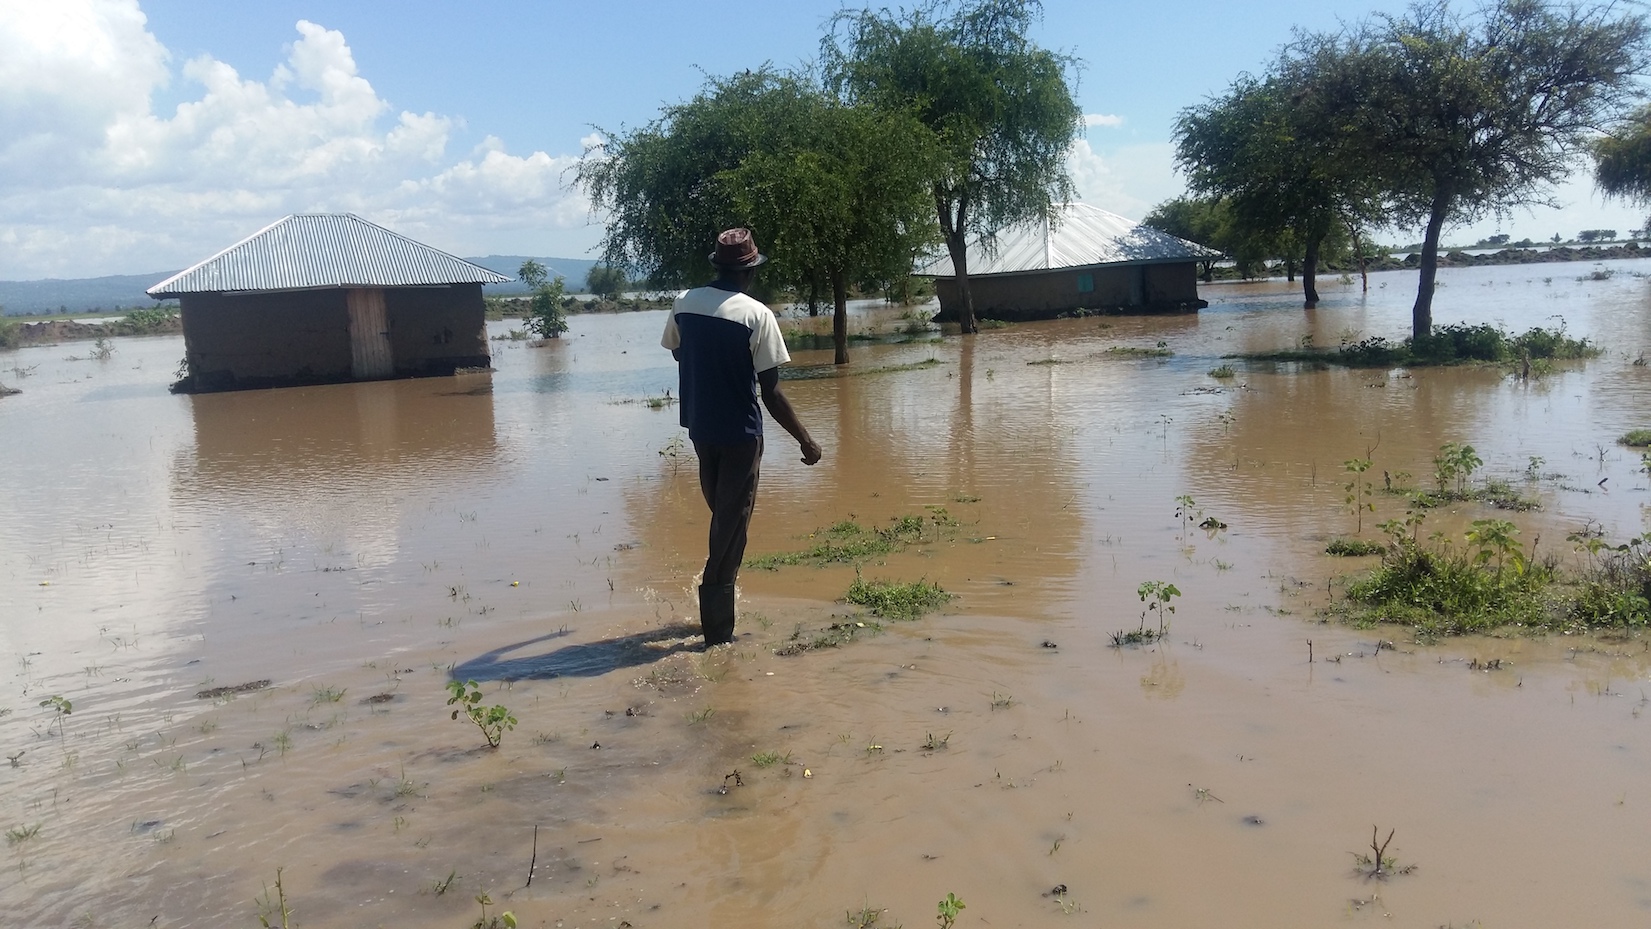 Houses and crops were destroyed by massive floods at Katito in Kenya's Kisumu County. ©World Vision Photo/Susan Otieno